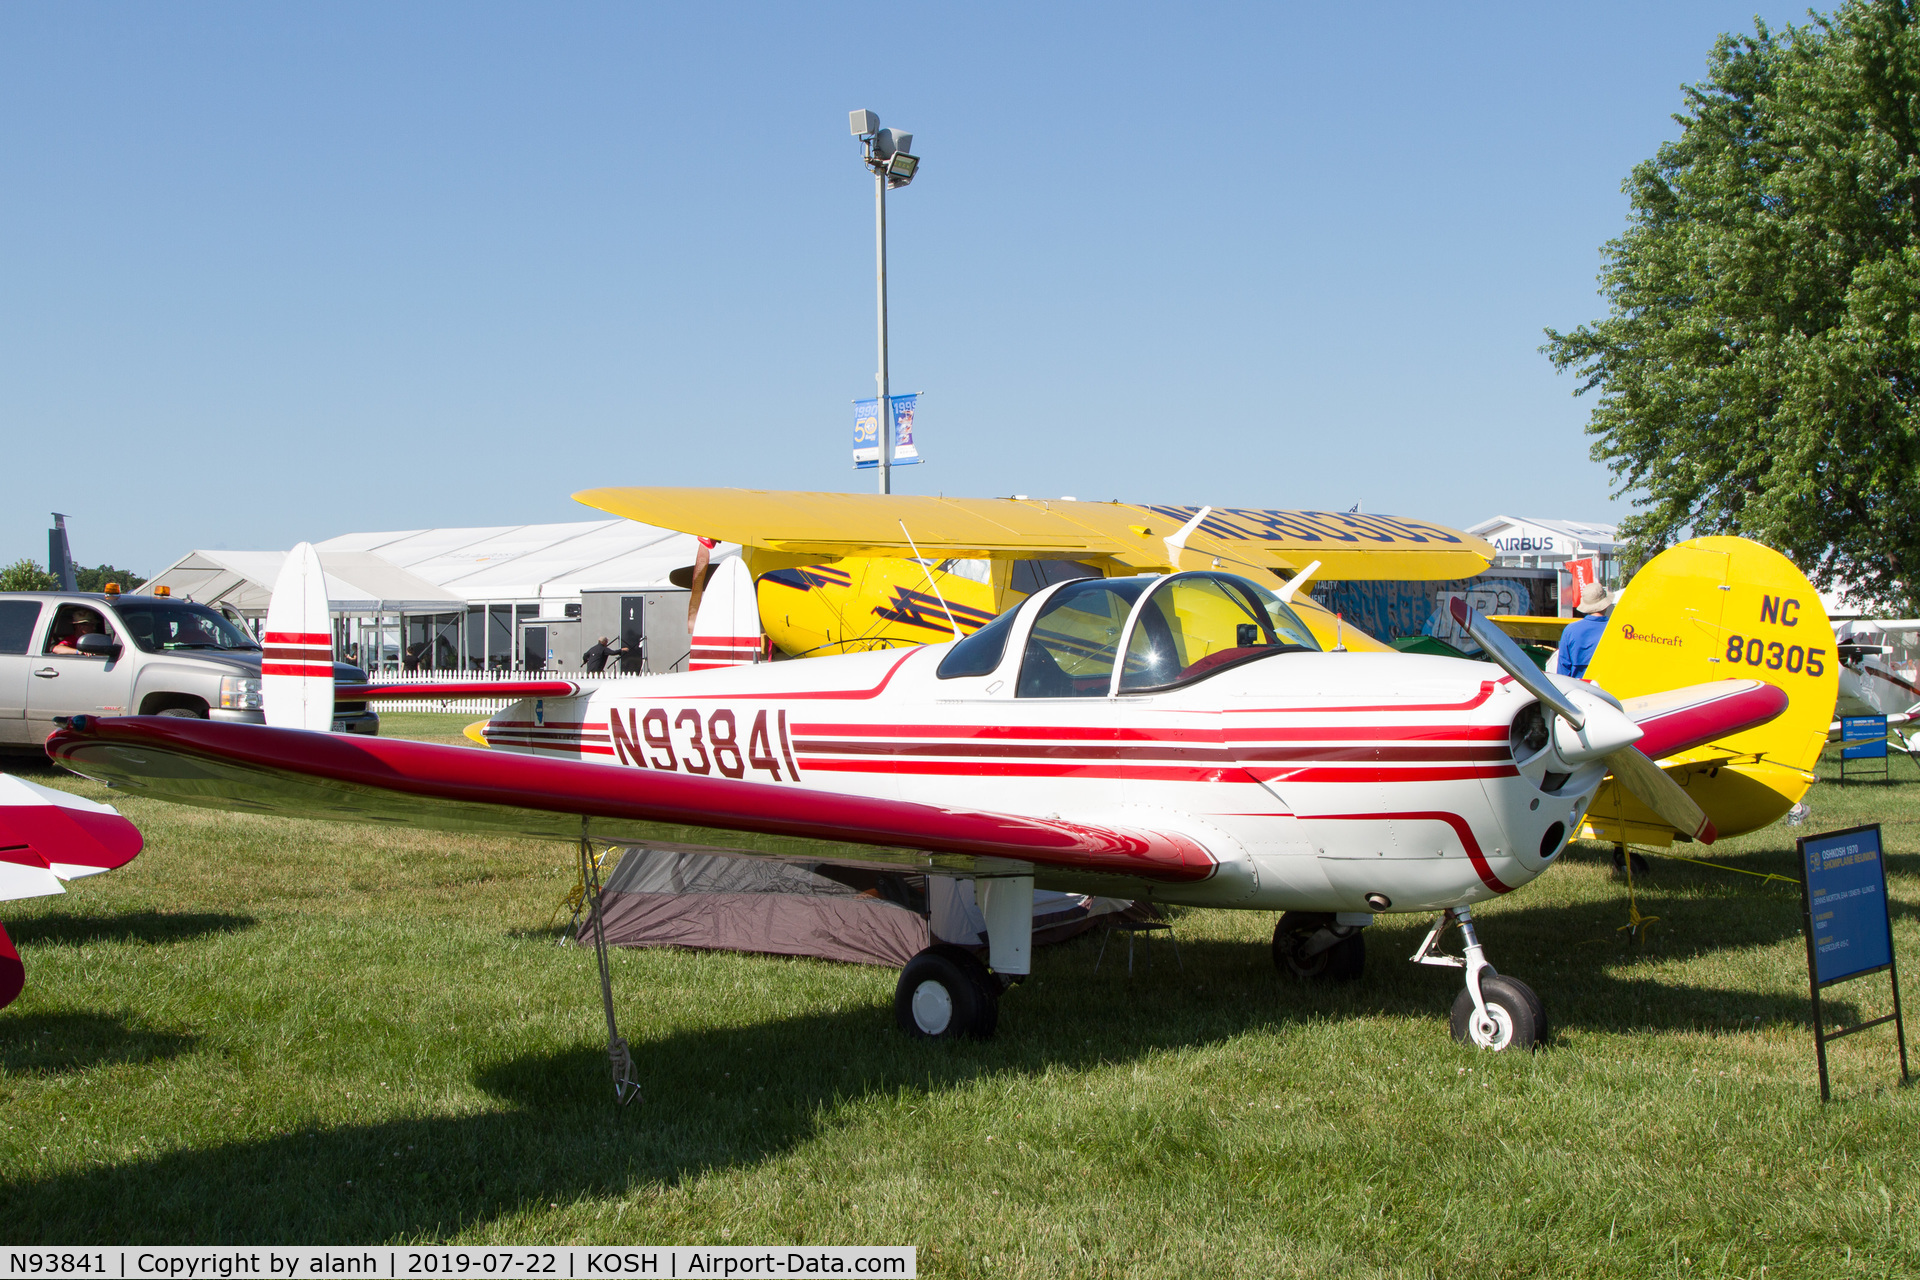 N93841, 1946 Engineering & Research 415-C C/N 1164, Part of the 1970 showplane reunion, at AirVenture 2019